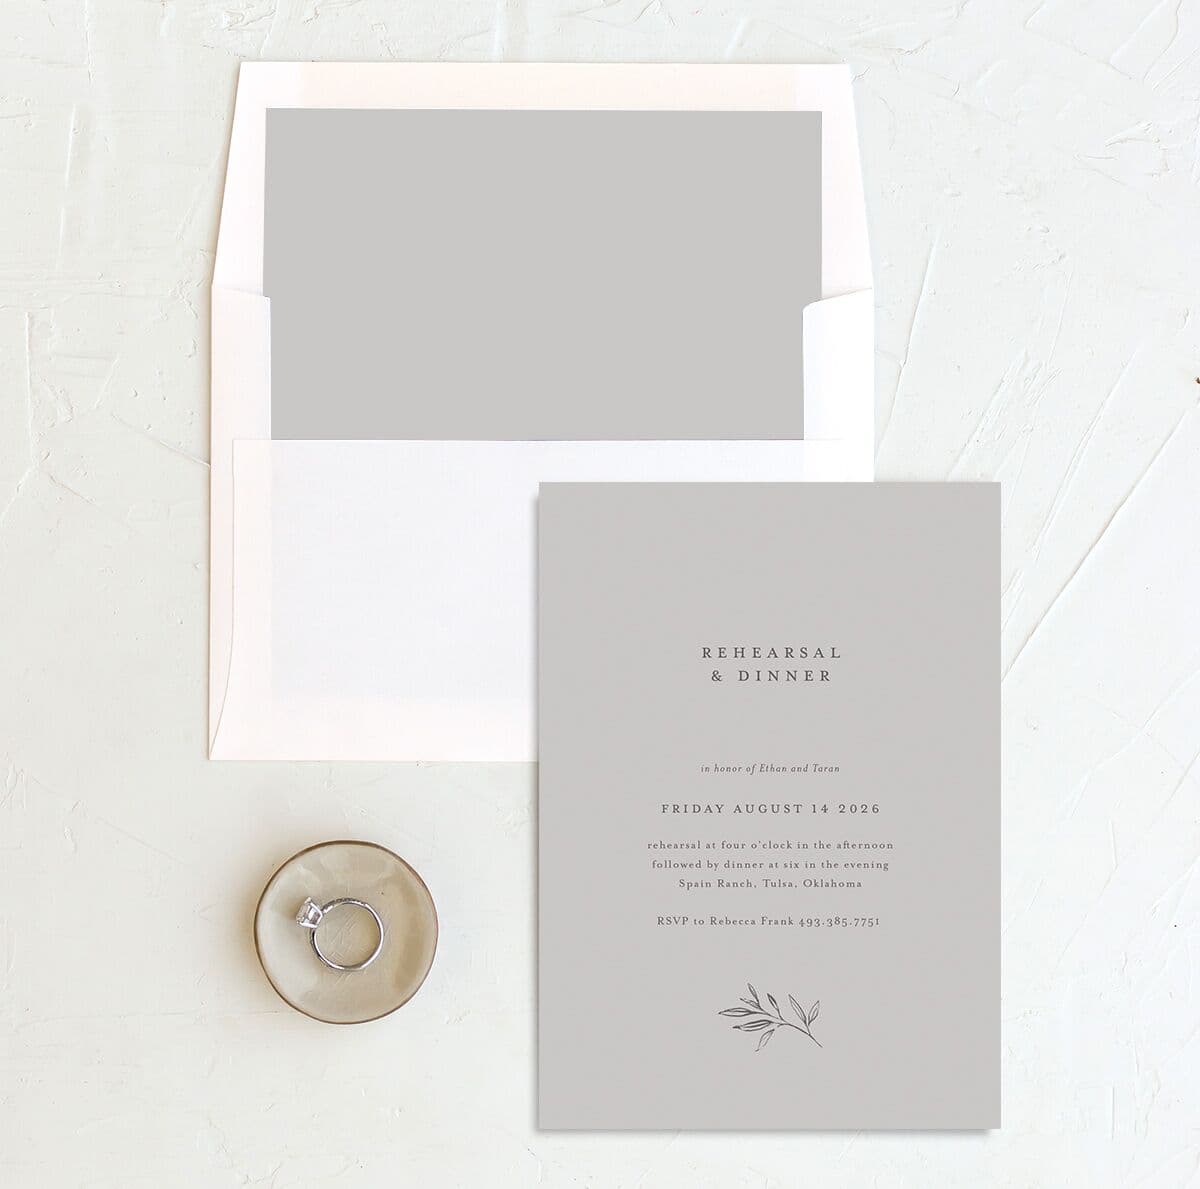 Simply Timeless Rehearsal Dinner Invitations envelope-and-liner in grey